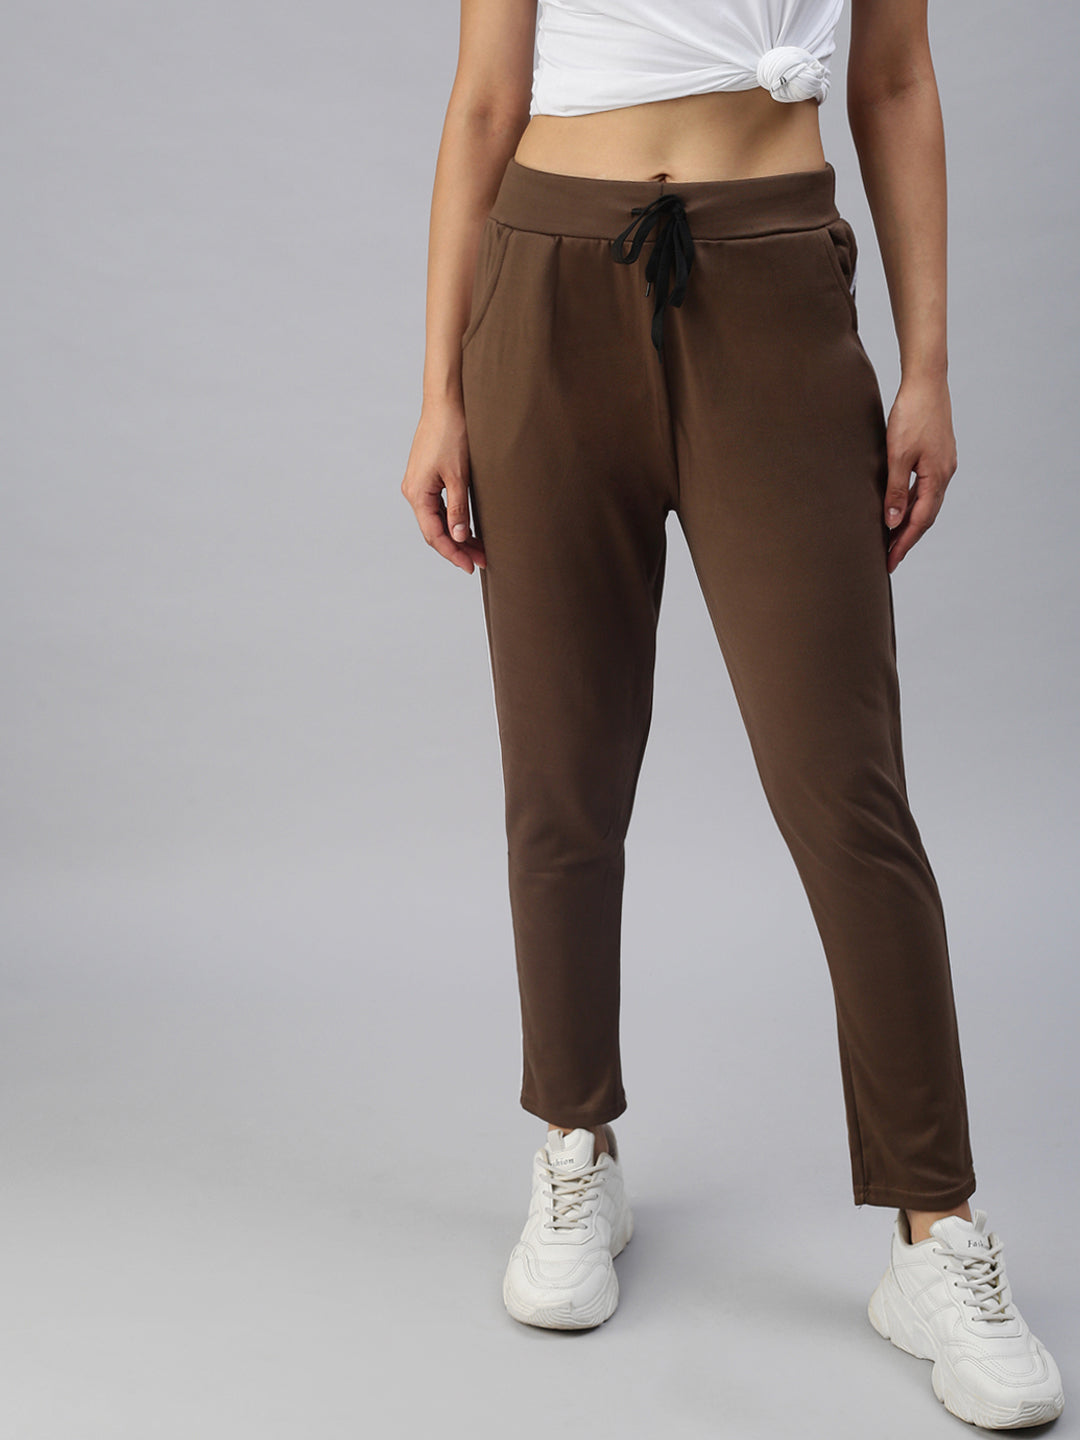 Women's Brown Solid Track Pants